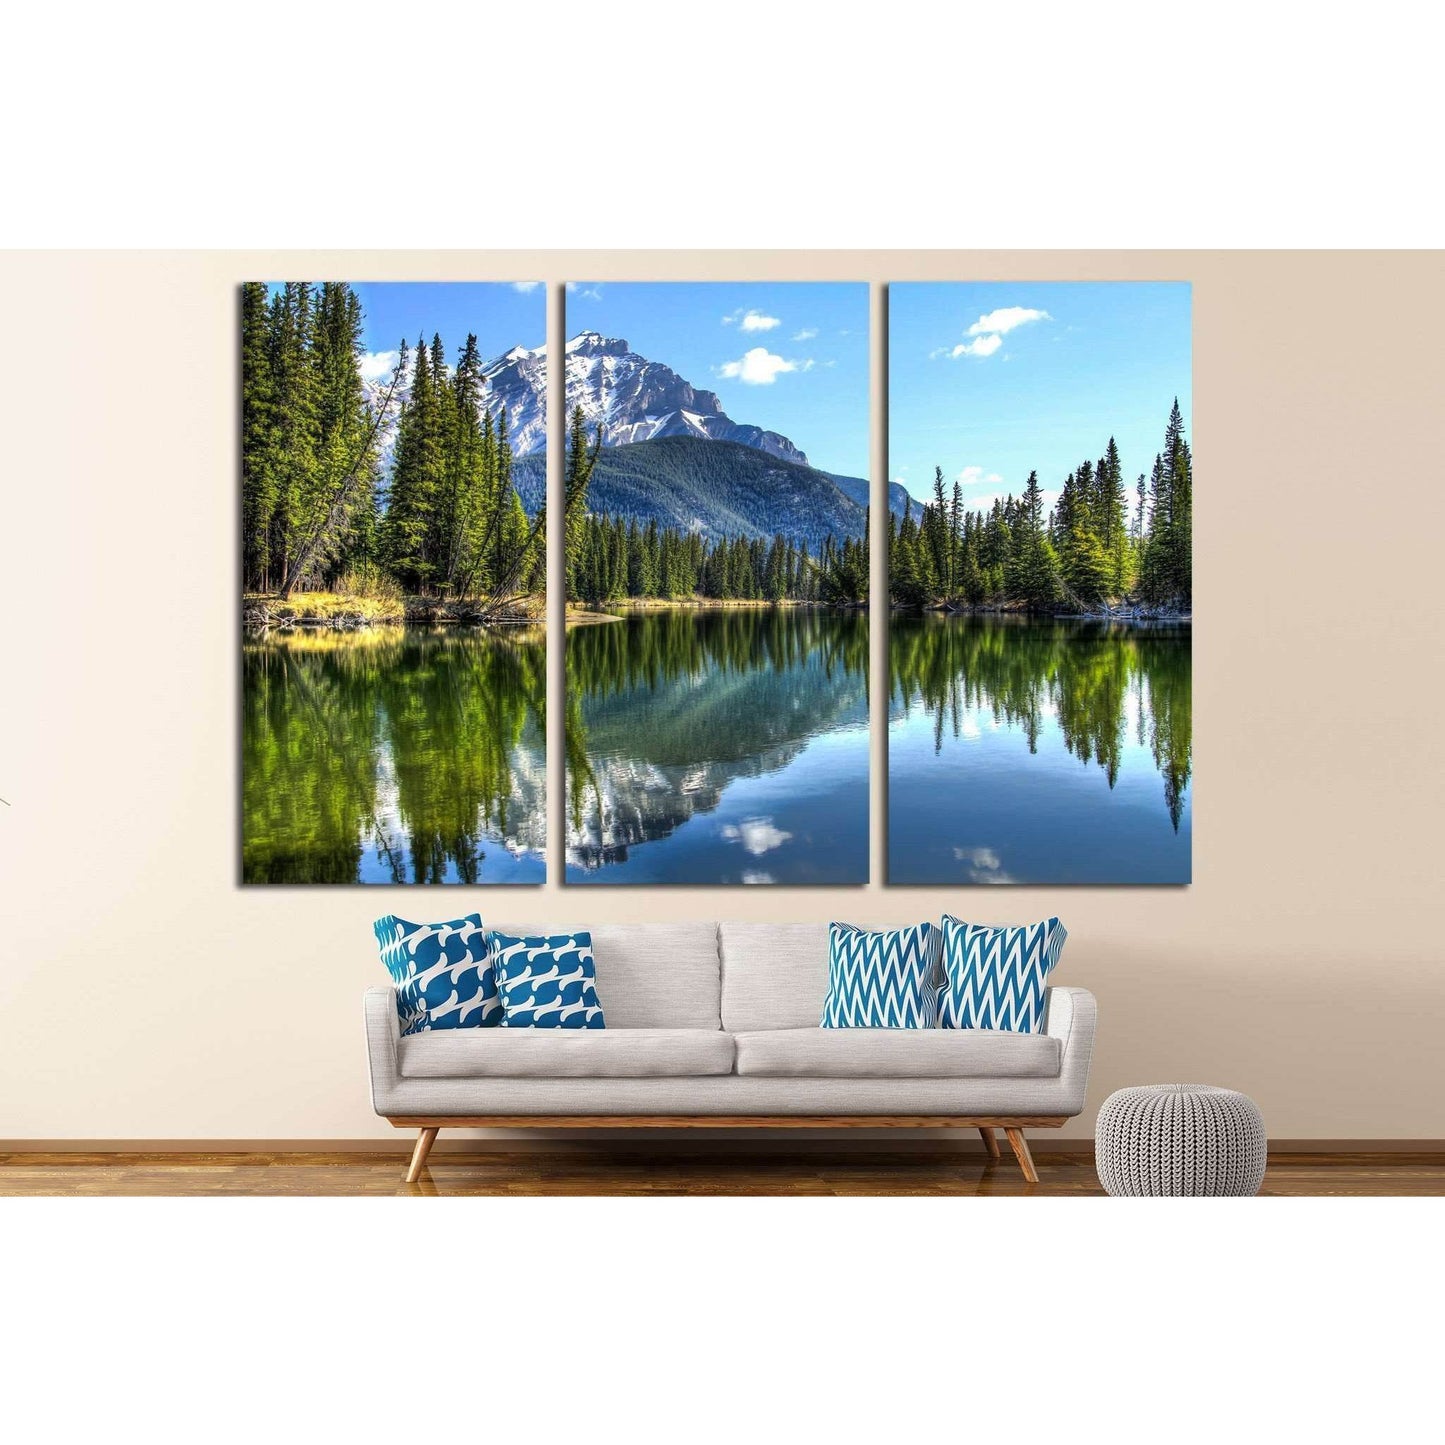 Reflective Pine Forest and Mountain Range Canvas for Rustic DecorThis canvas print portrays the tranquil beauty of a mountain lake, reflecting the crisp image of the surrounding pines and the imposing mountain range. The clear blue sky and the still water